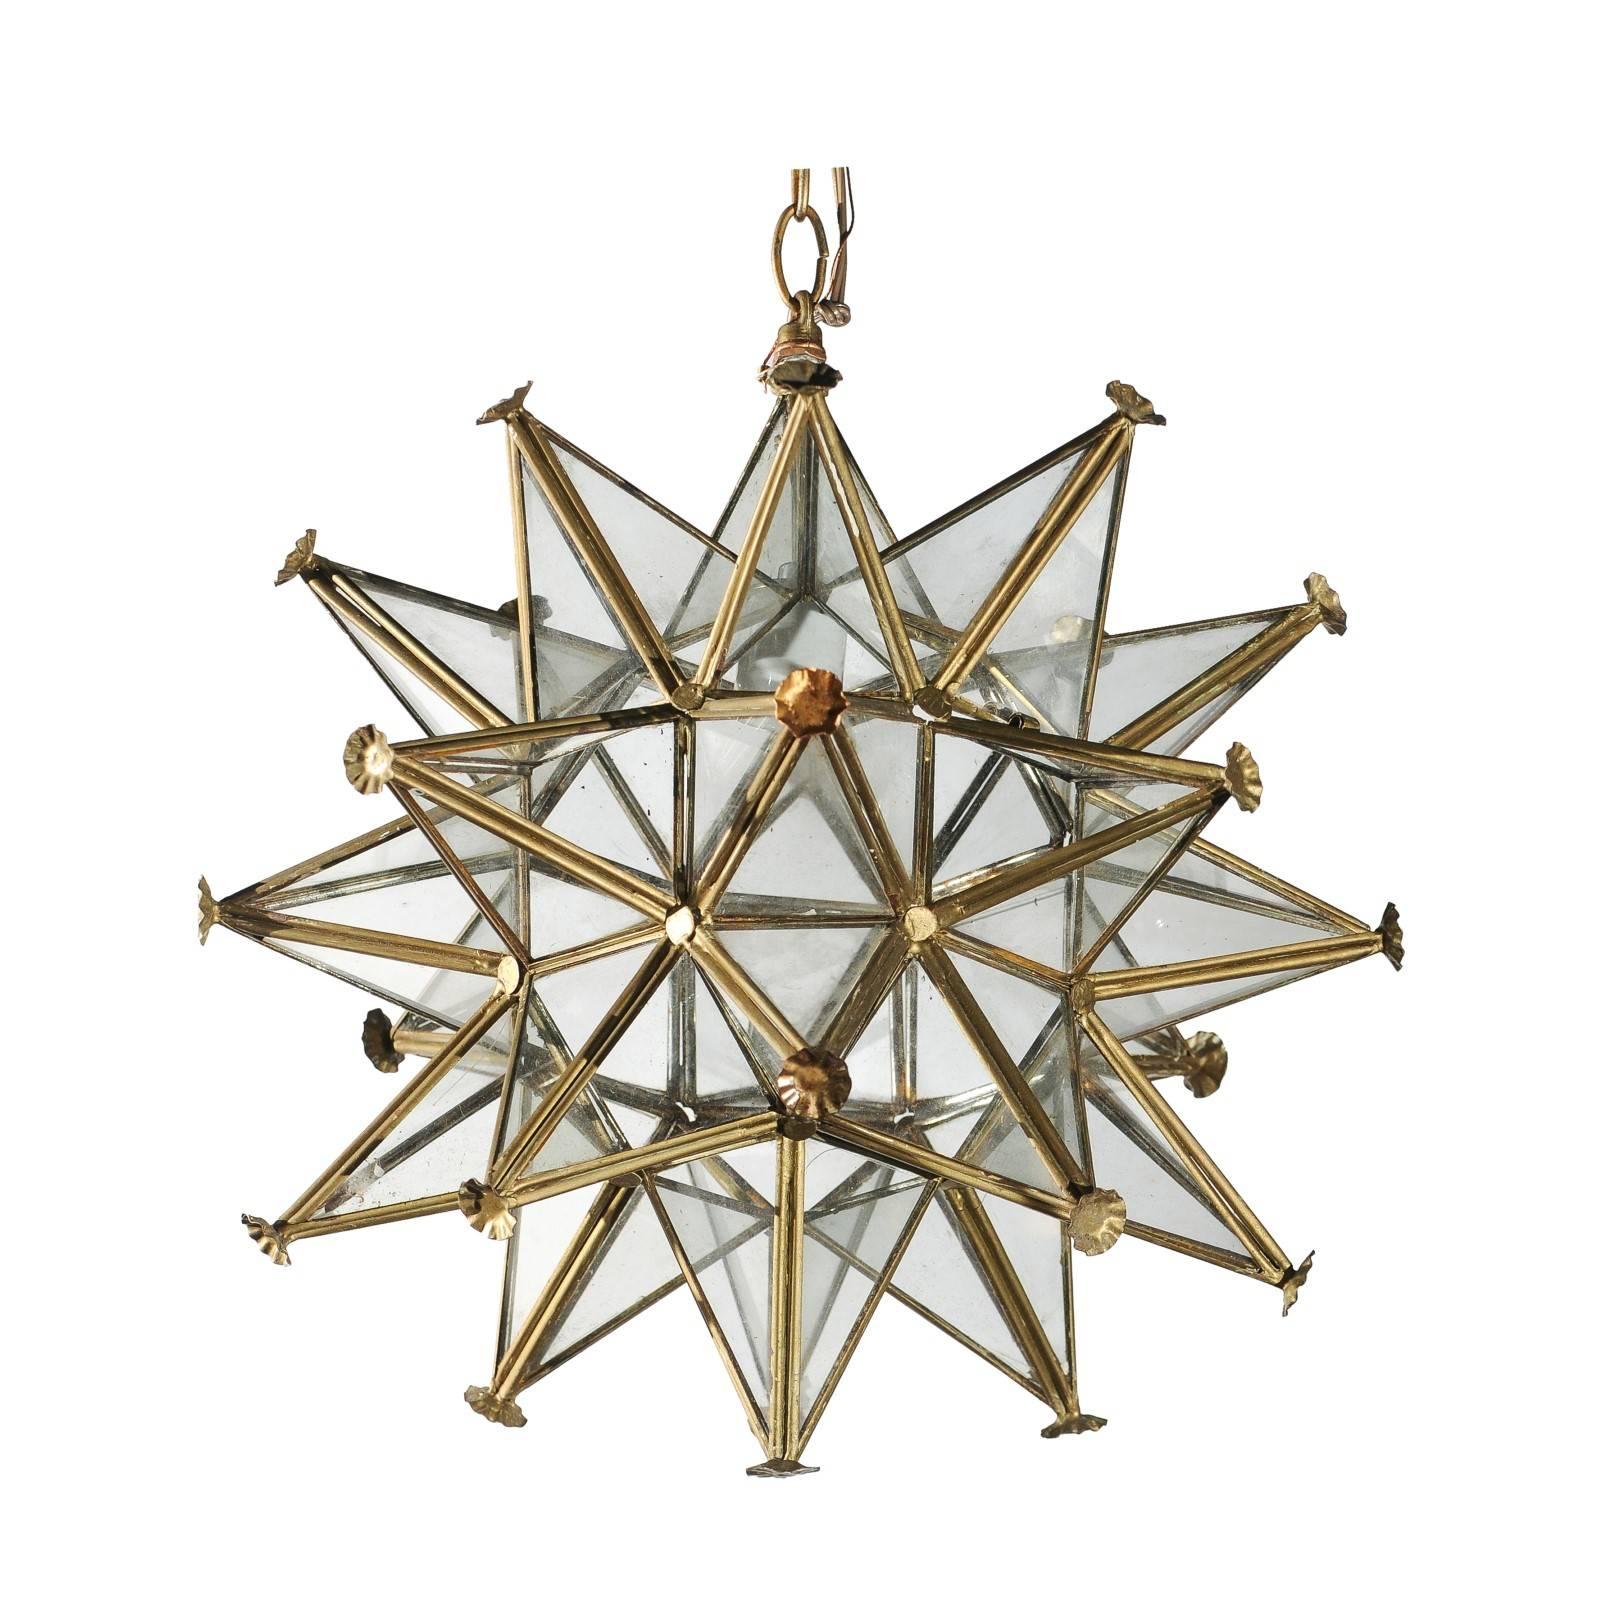 Vintage French Star Light Fixture with Gilt Metal Frame and Glass Panels, 1950s